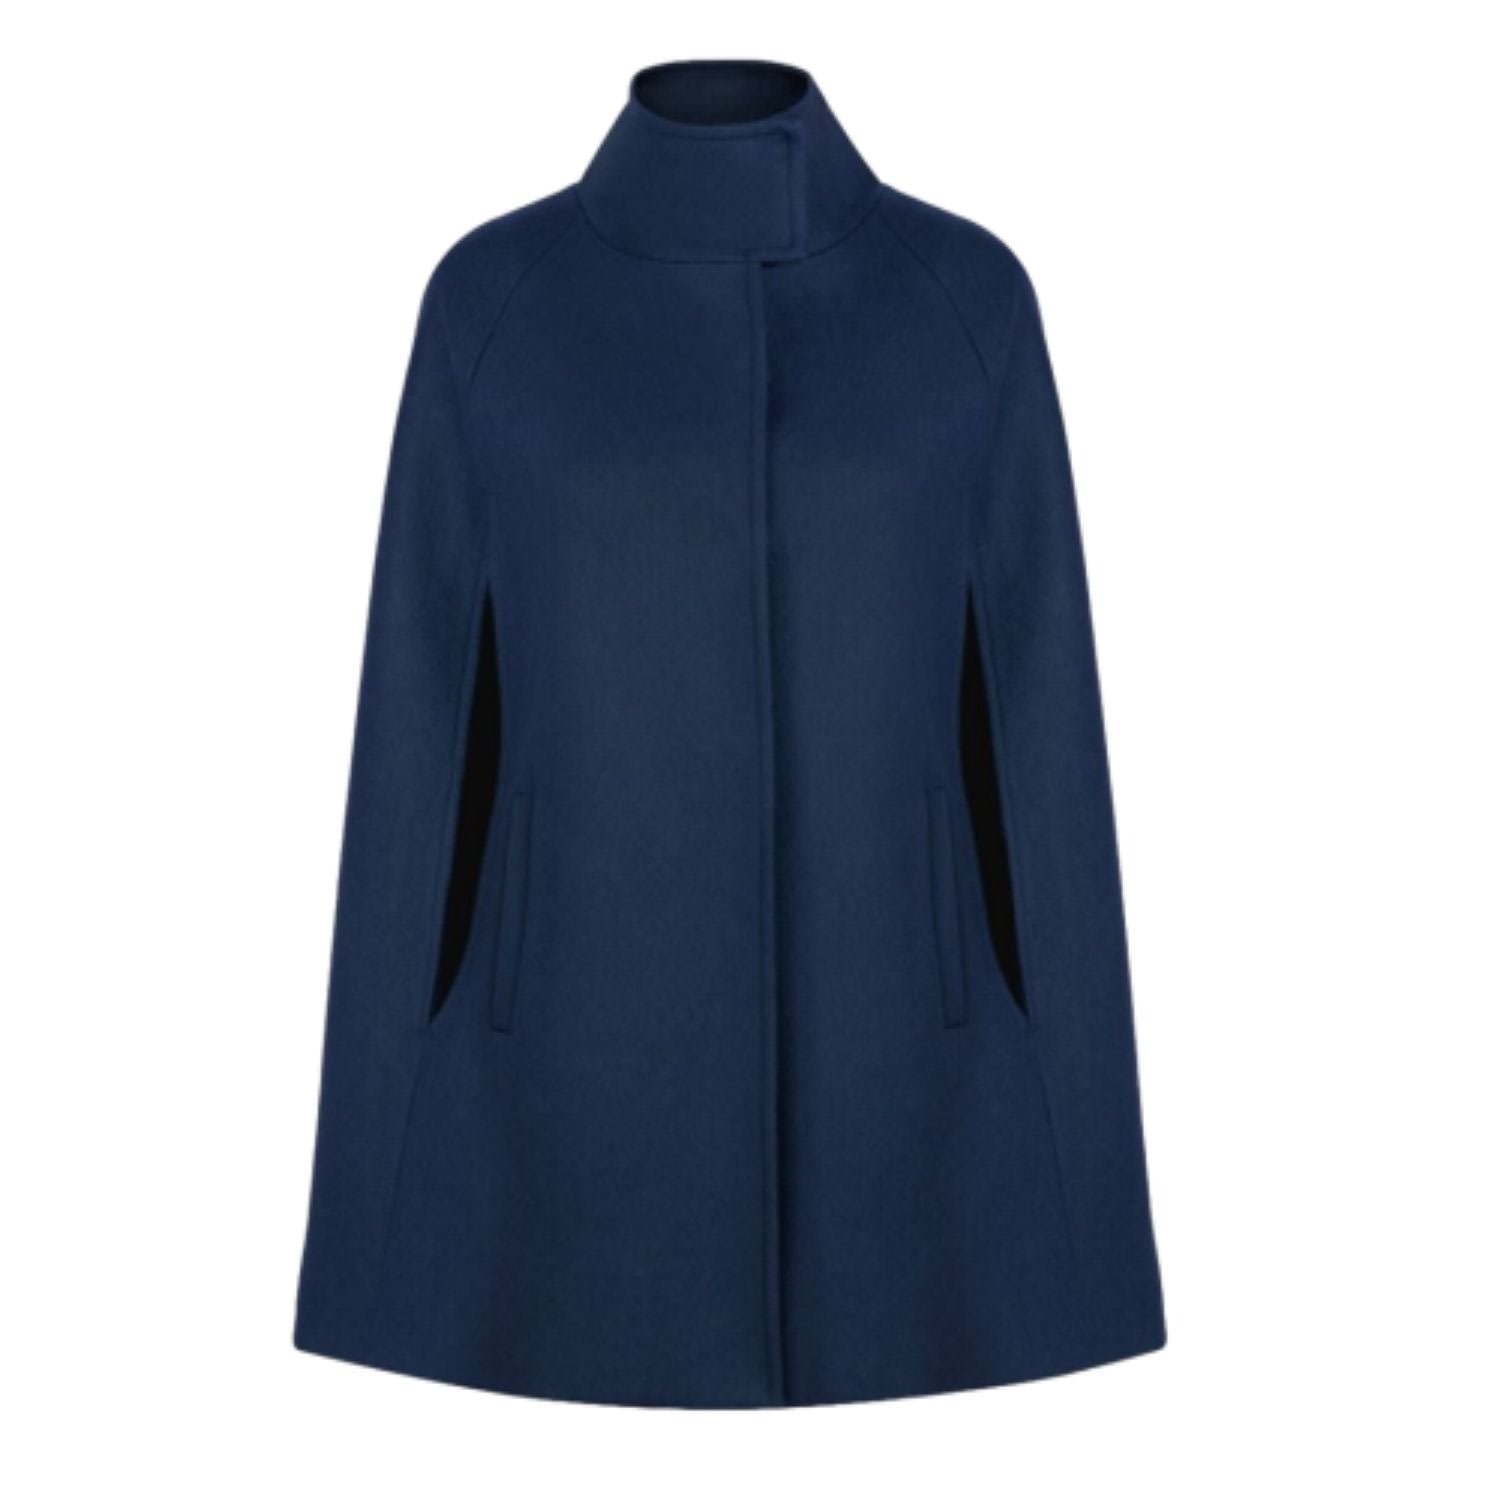 Women’s Single Breasted Wool Cashmere Cape - Blue Extra Small Allora